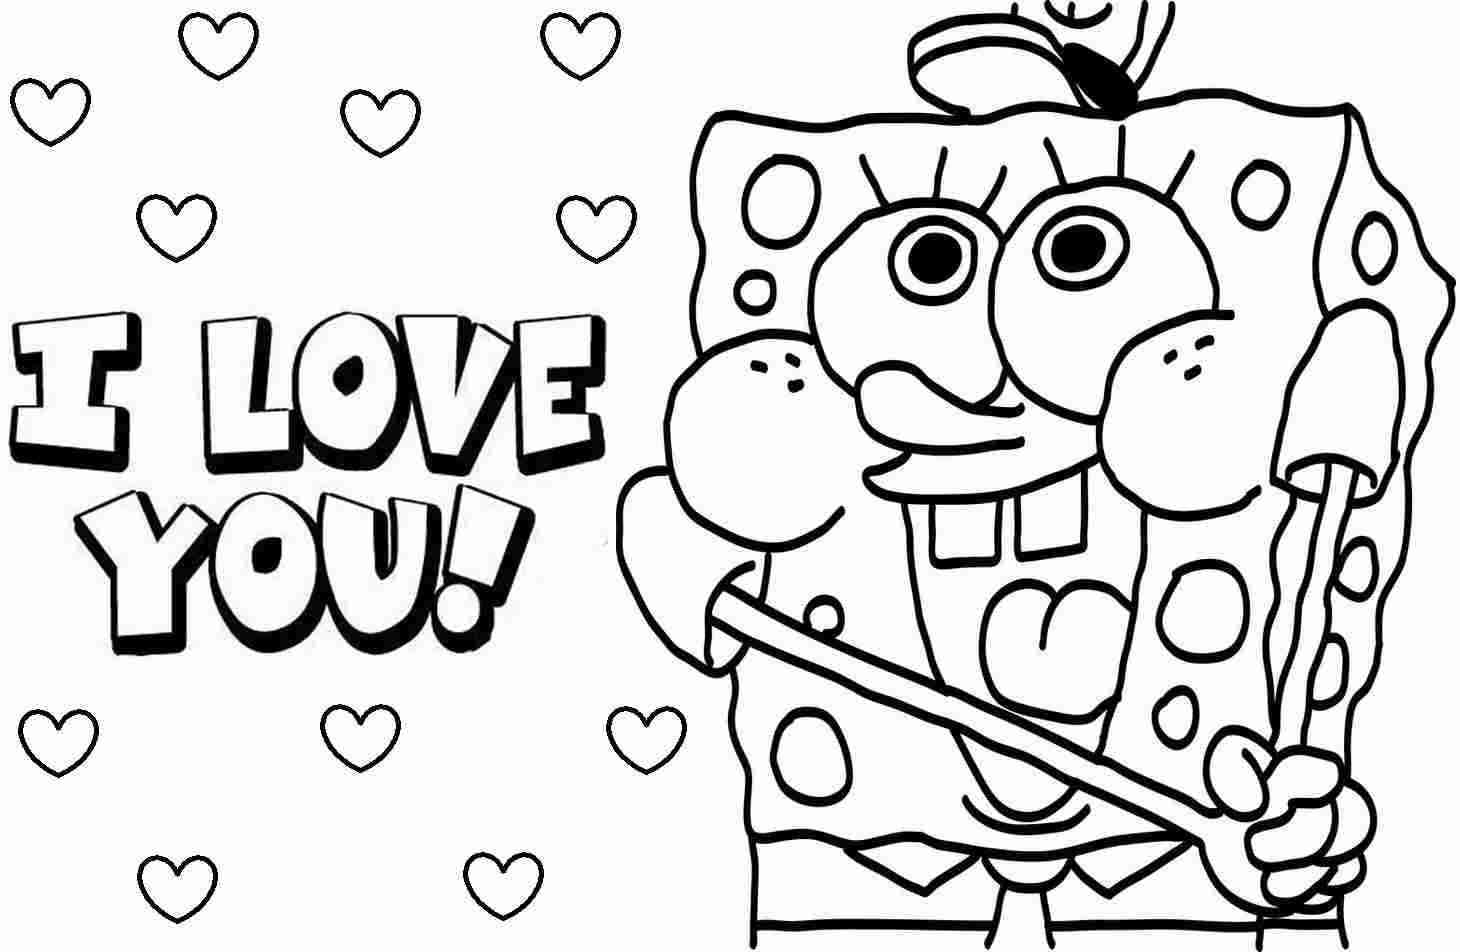 Coloring Pages For 10 Year Olds Printable at GetDrawings | Free download